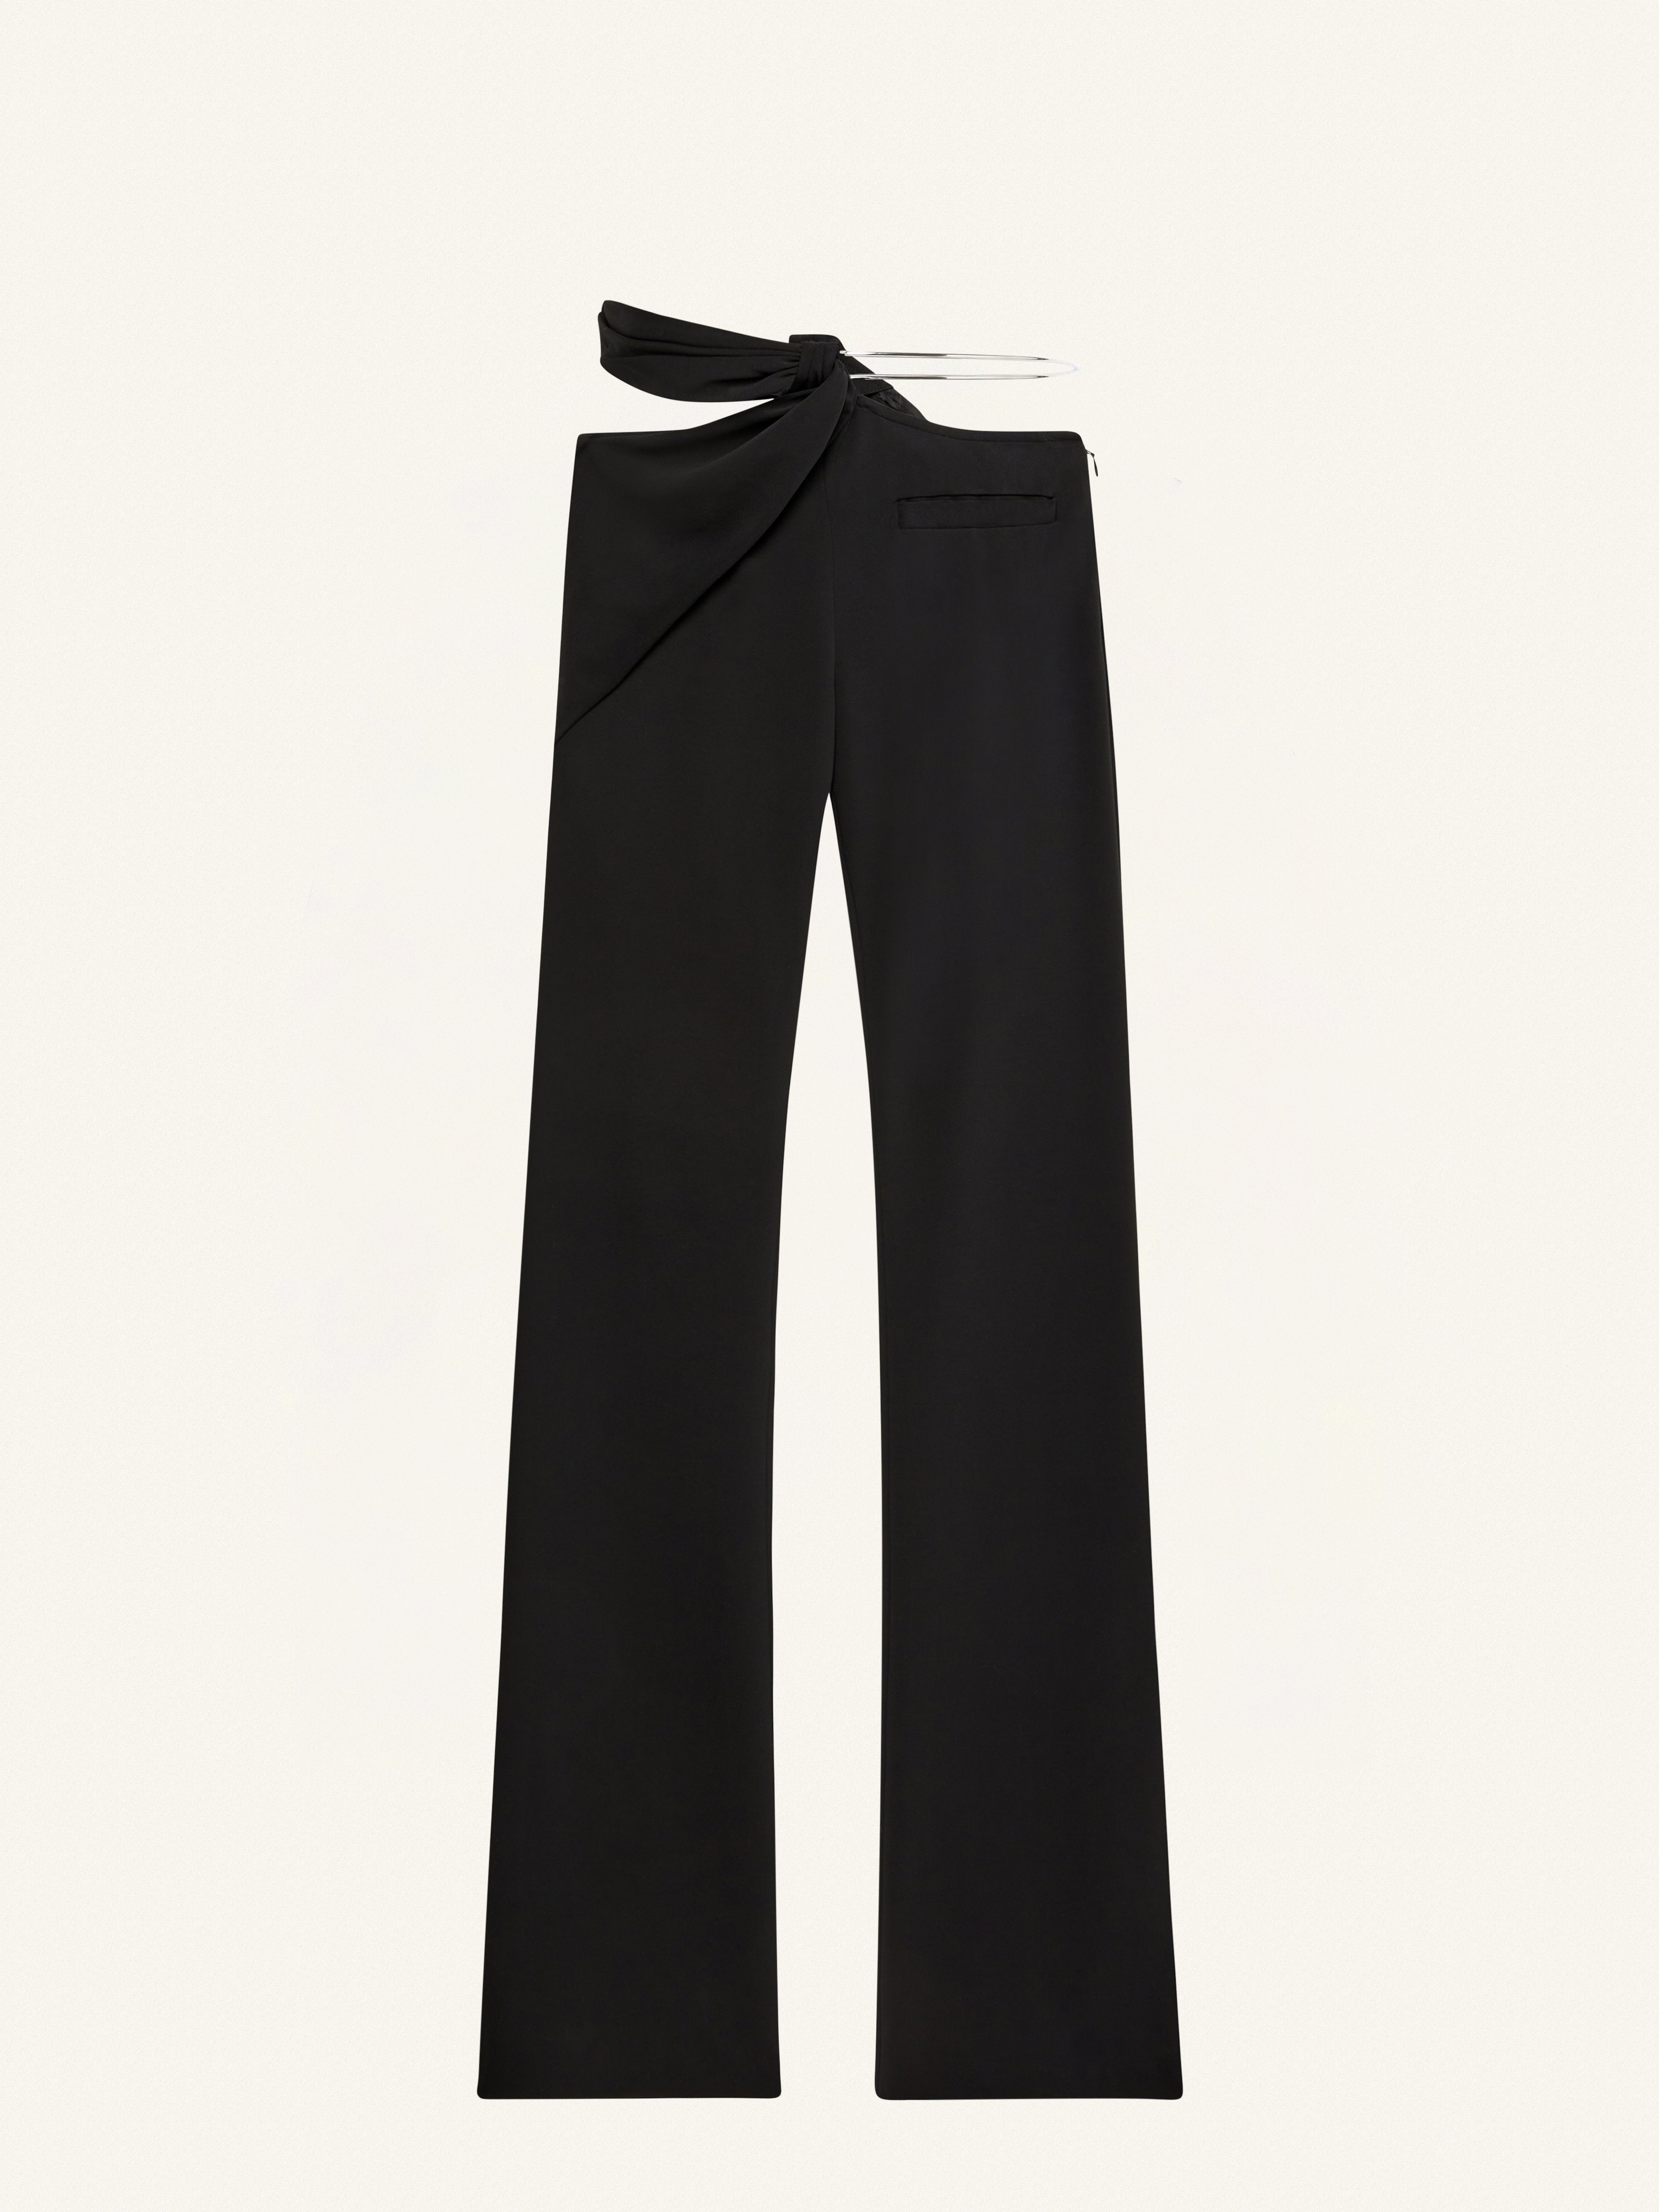 NEW AGE CREPE JERSEY PANTS - 1